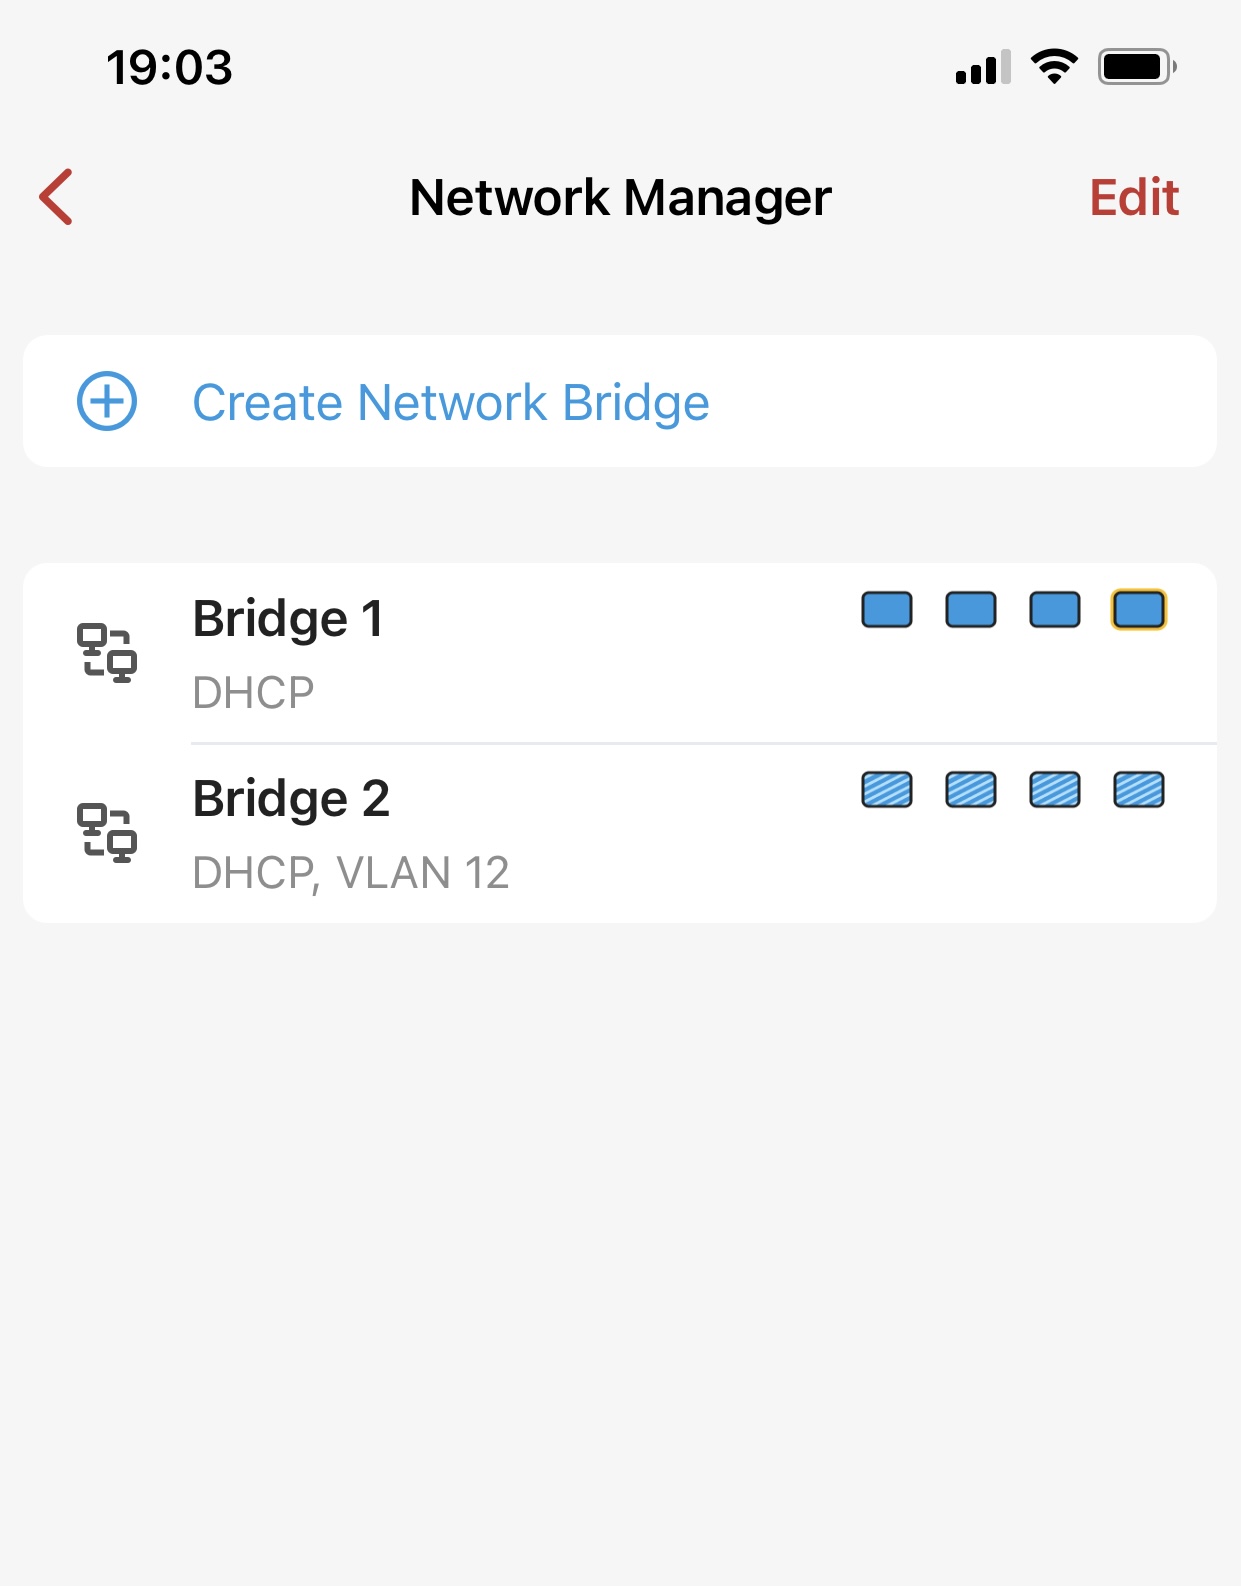 Firewalla Network Managed can now monitor your bridge interface and VLAN ID